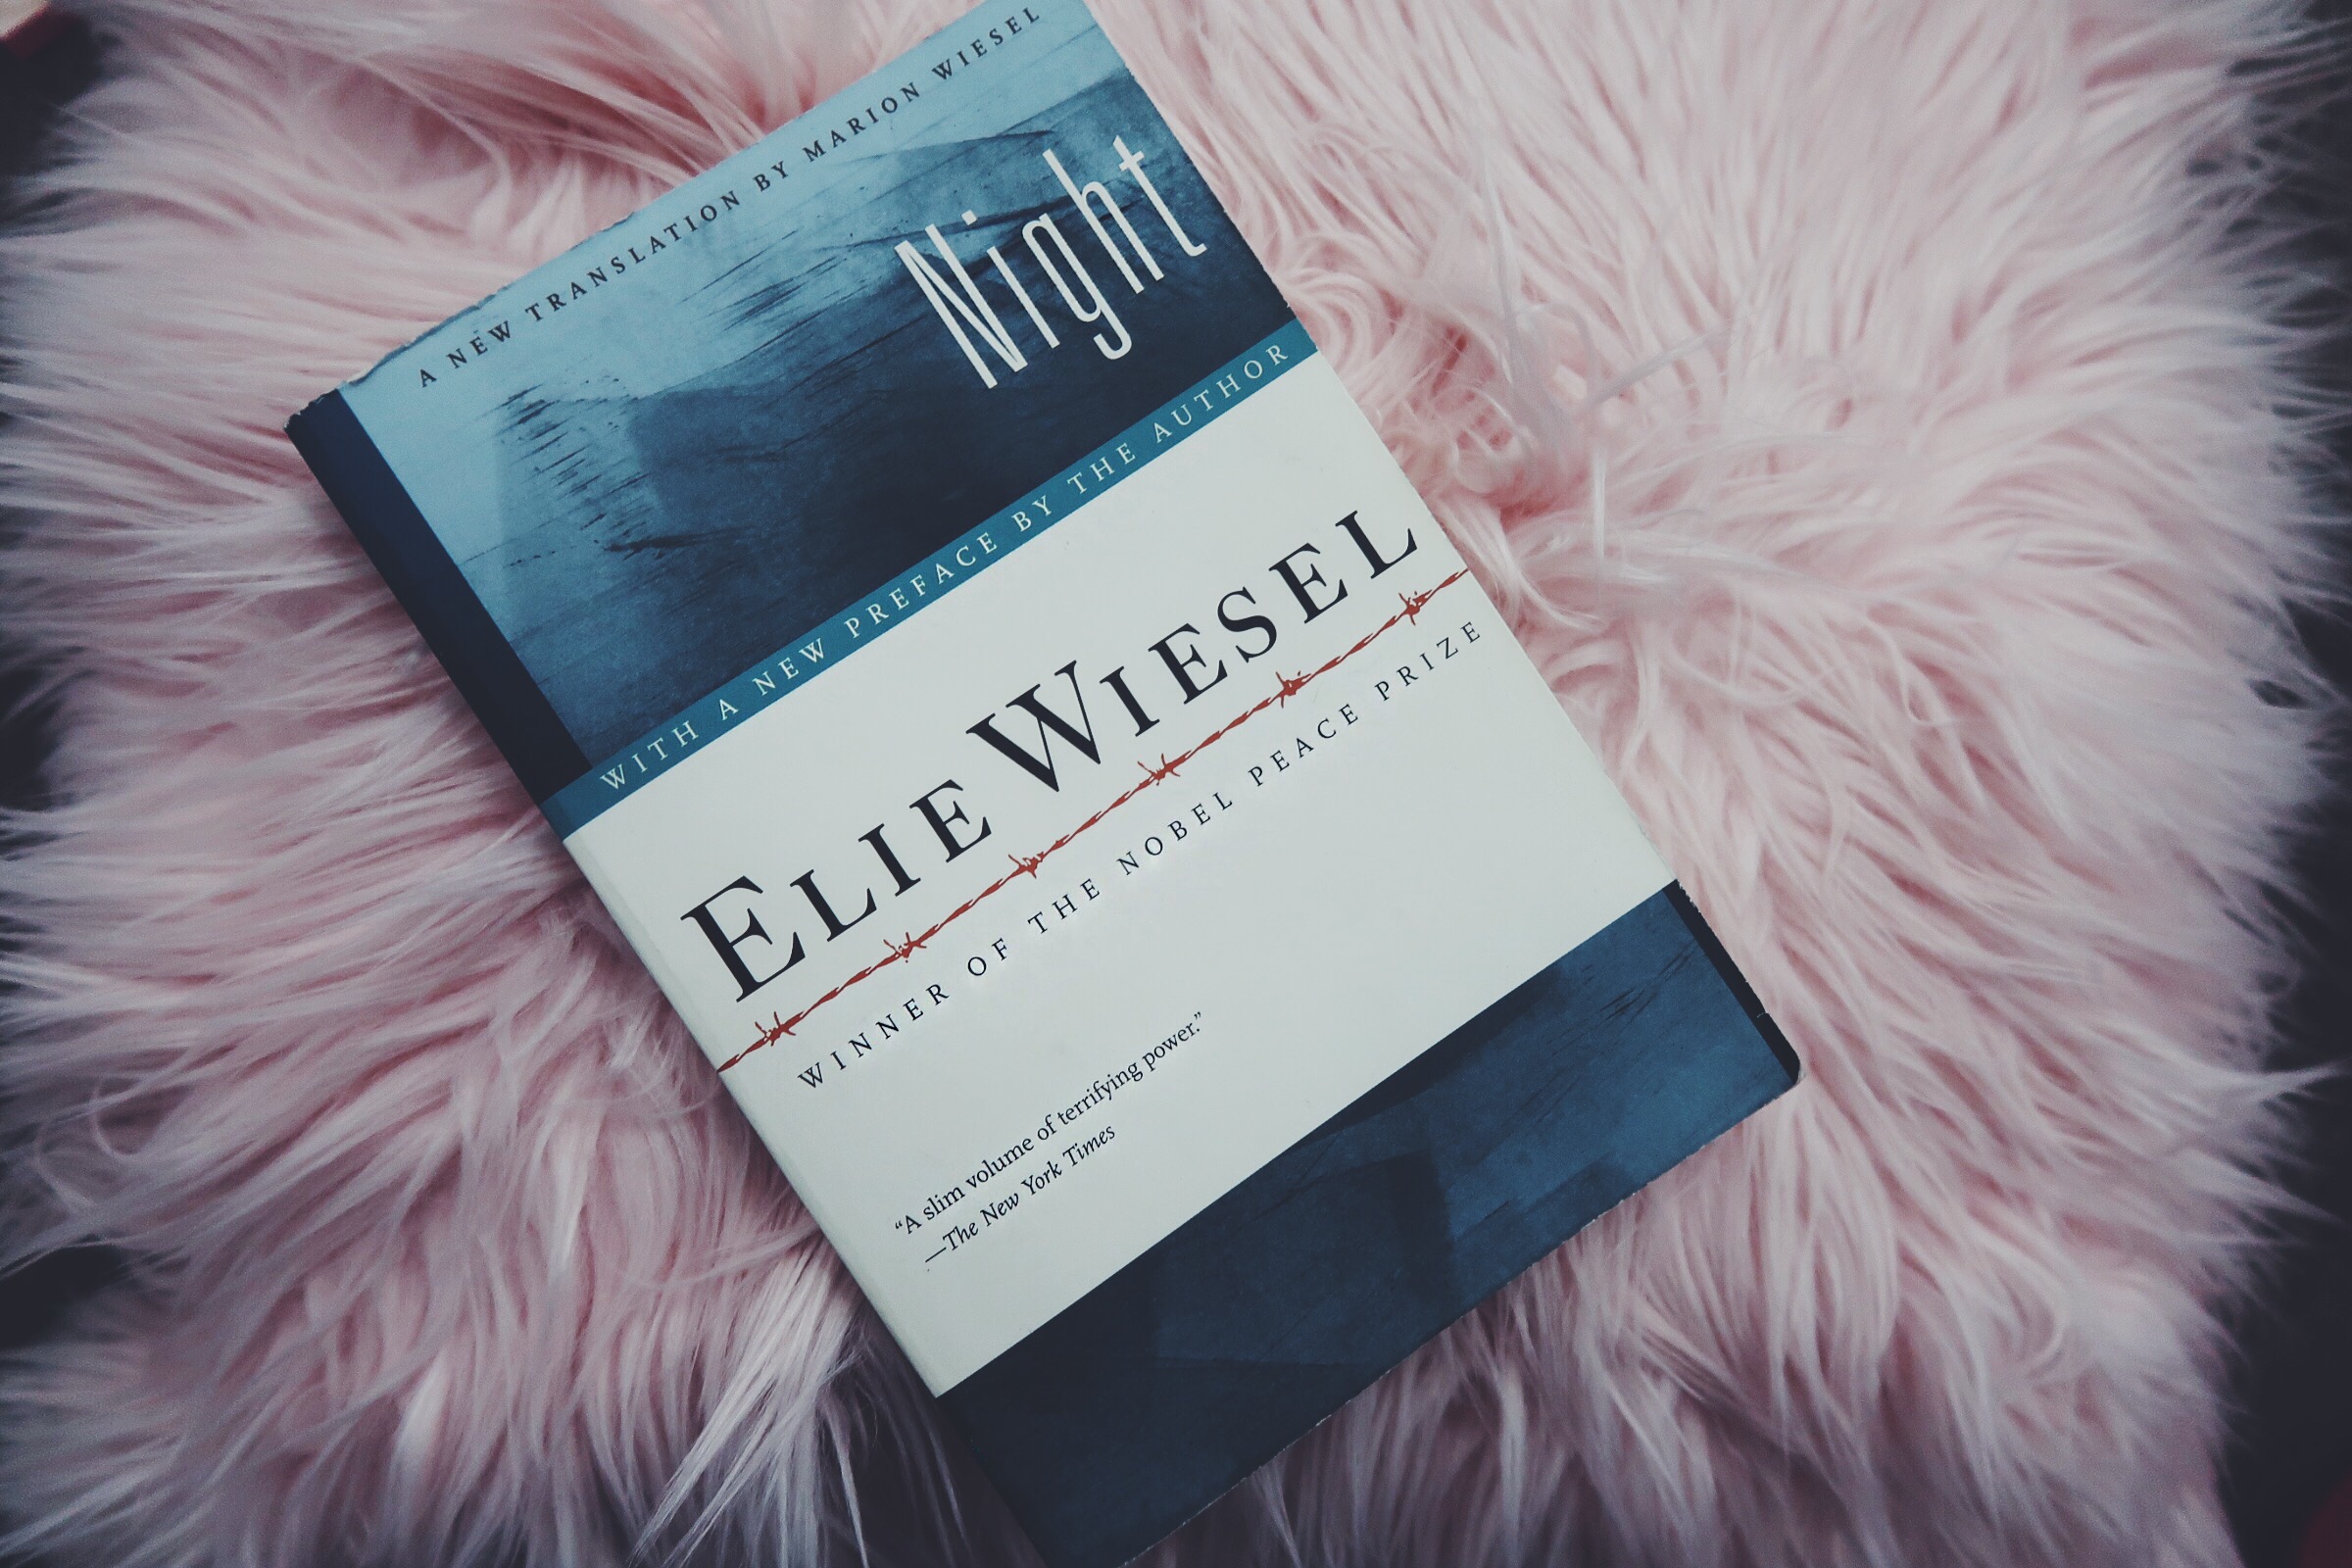 Night by Elie Wiesel book review